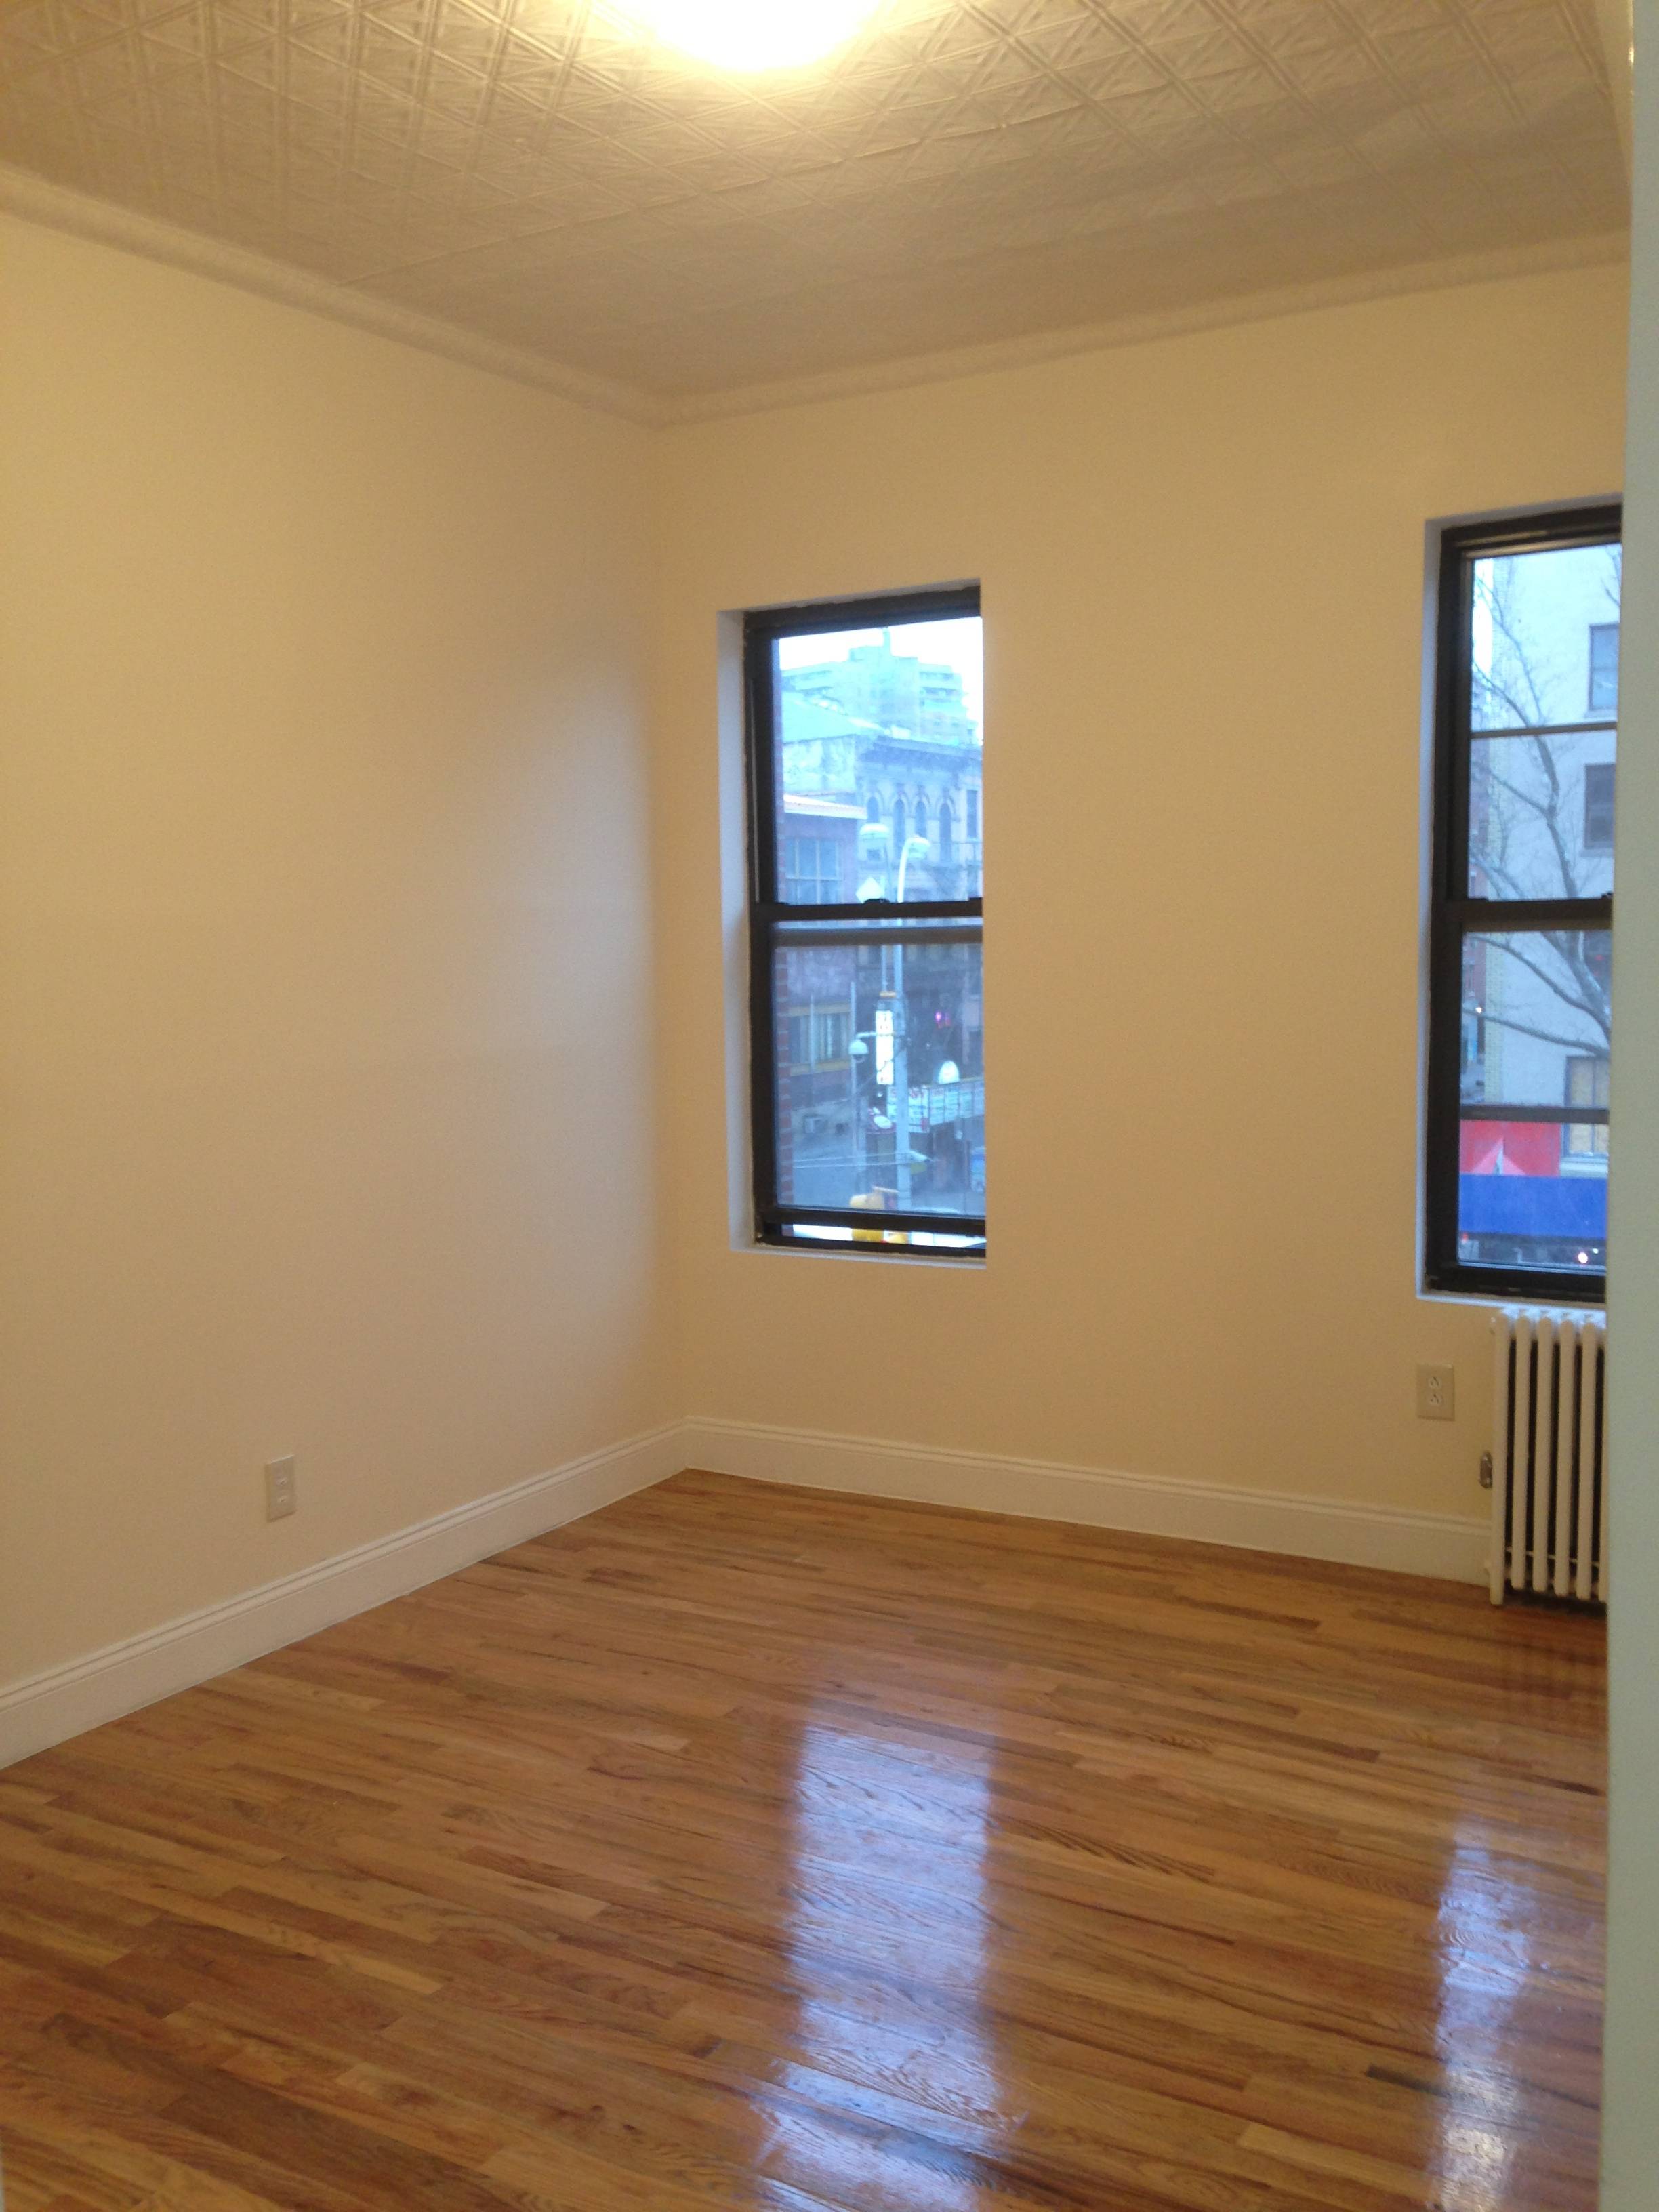 Renovated One Bedroom in Lower East Side/Chinatown $1800 Will not last!